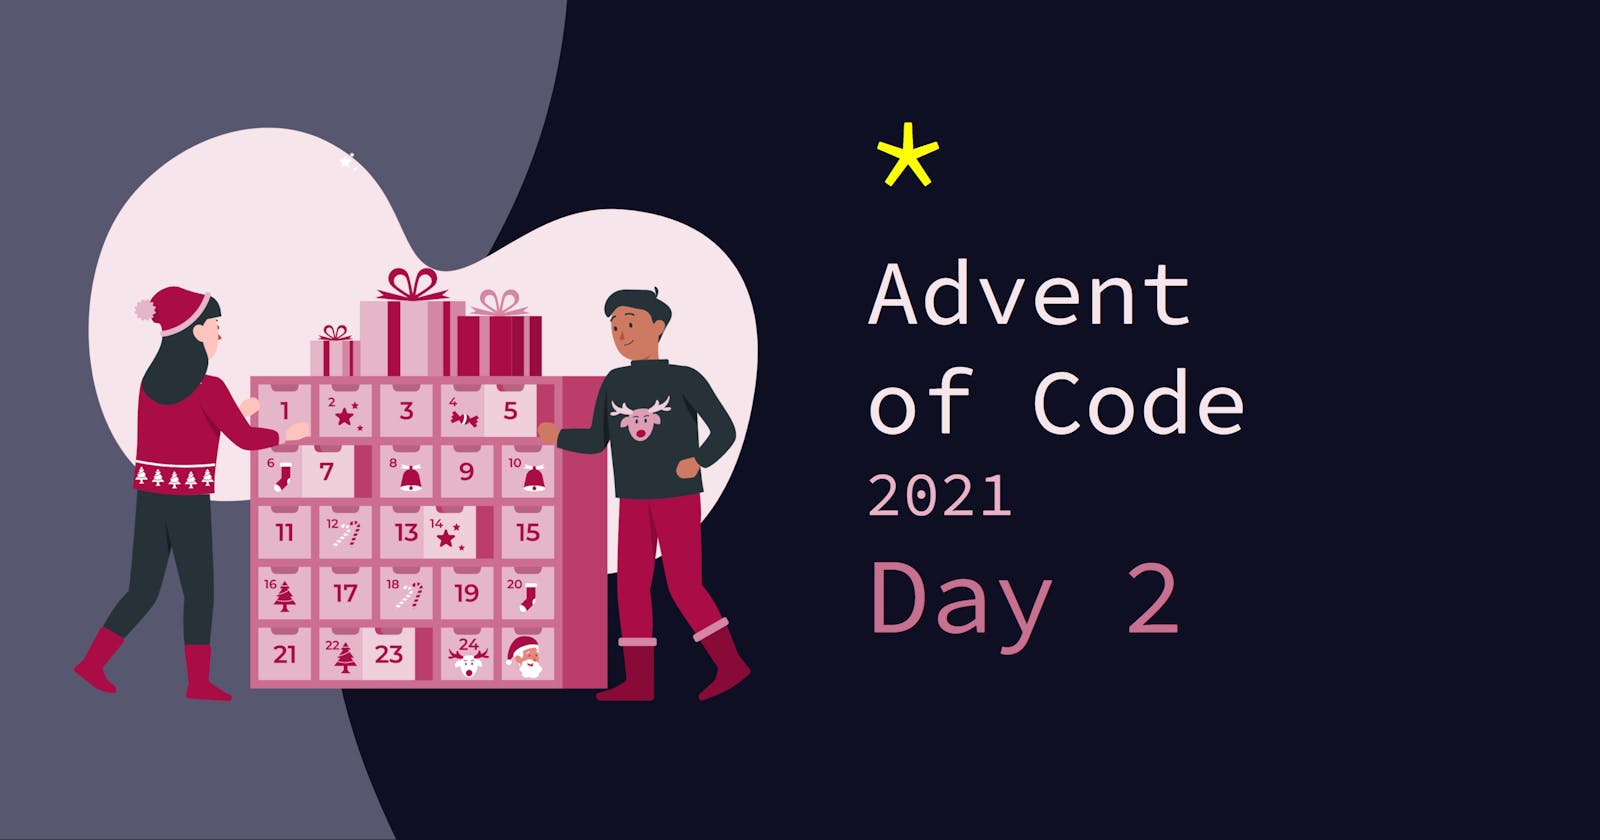 Advent of Code 2021: Day 2